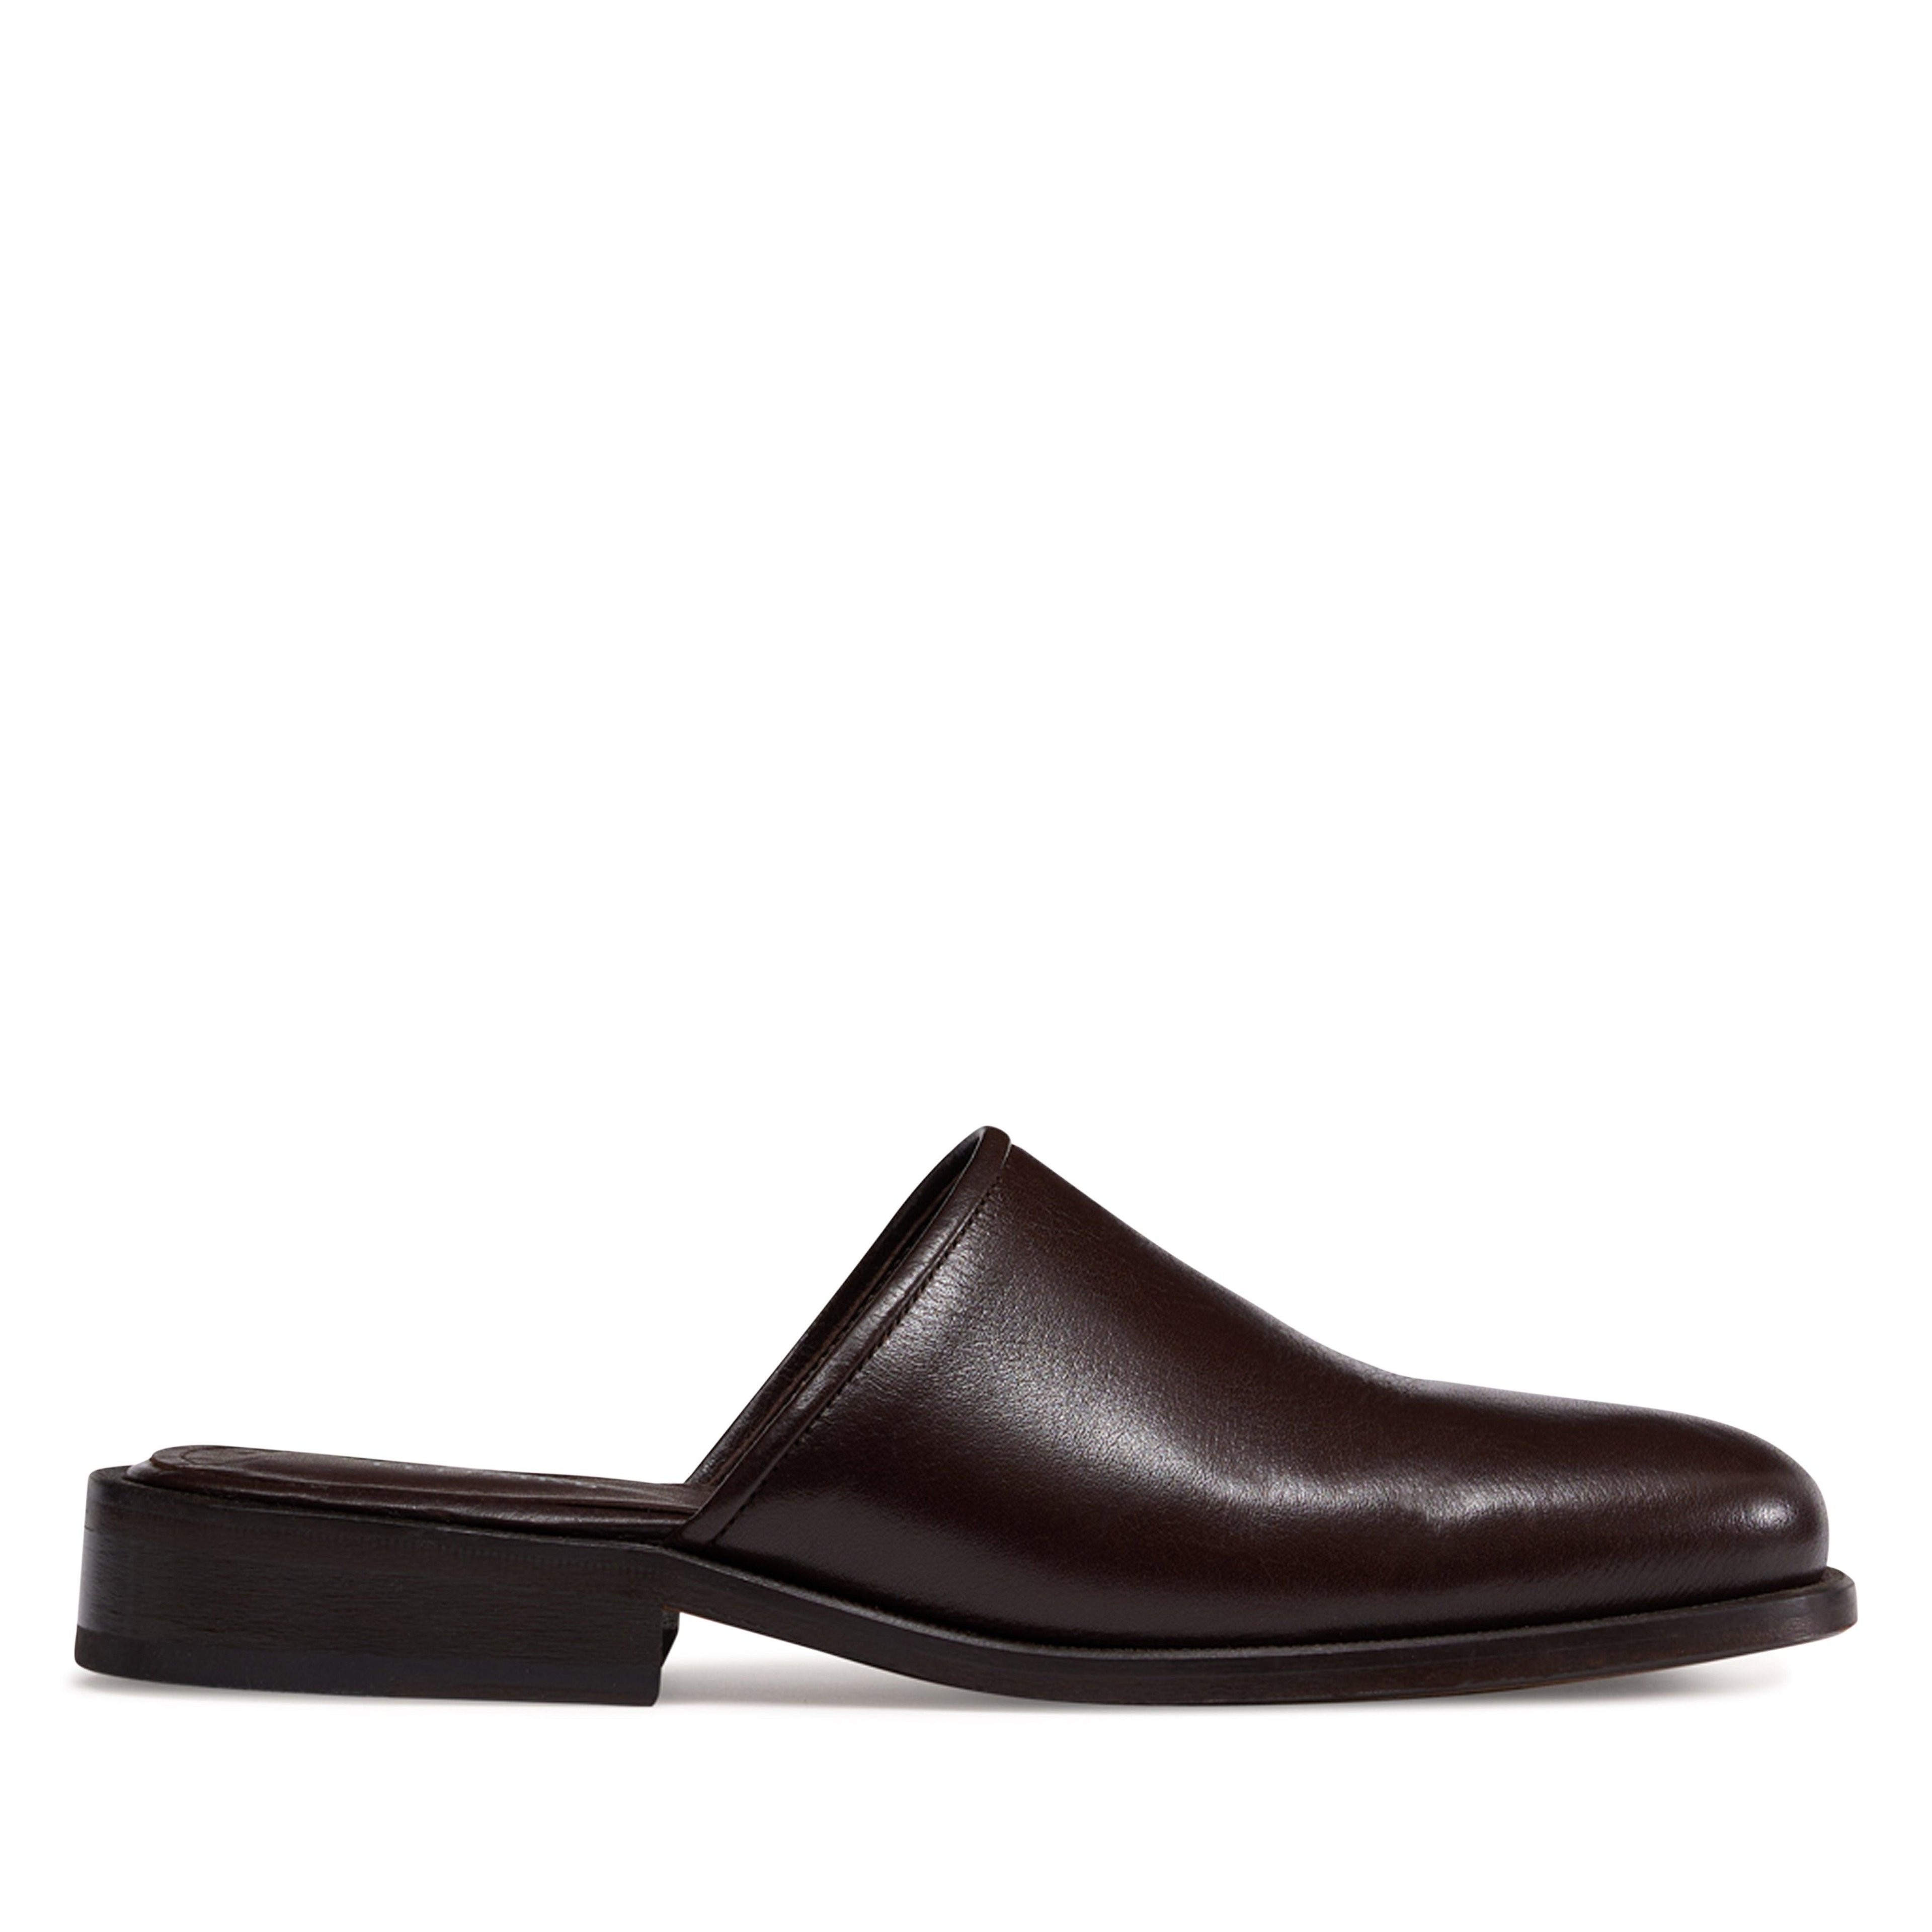 Lemaire - Men's Square Mule - (Dark Brown) by LEMAIRE